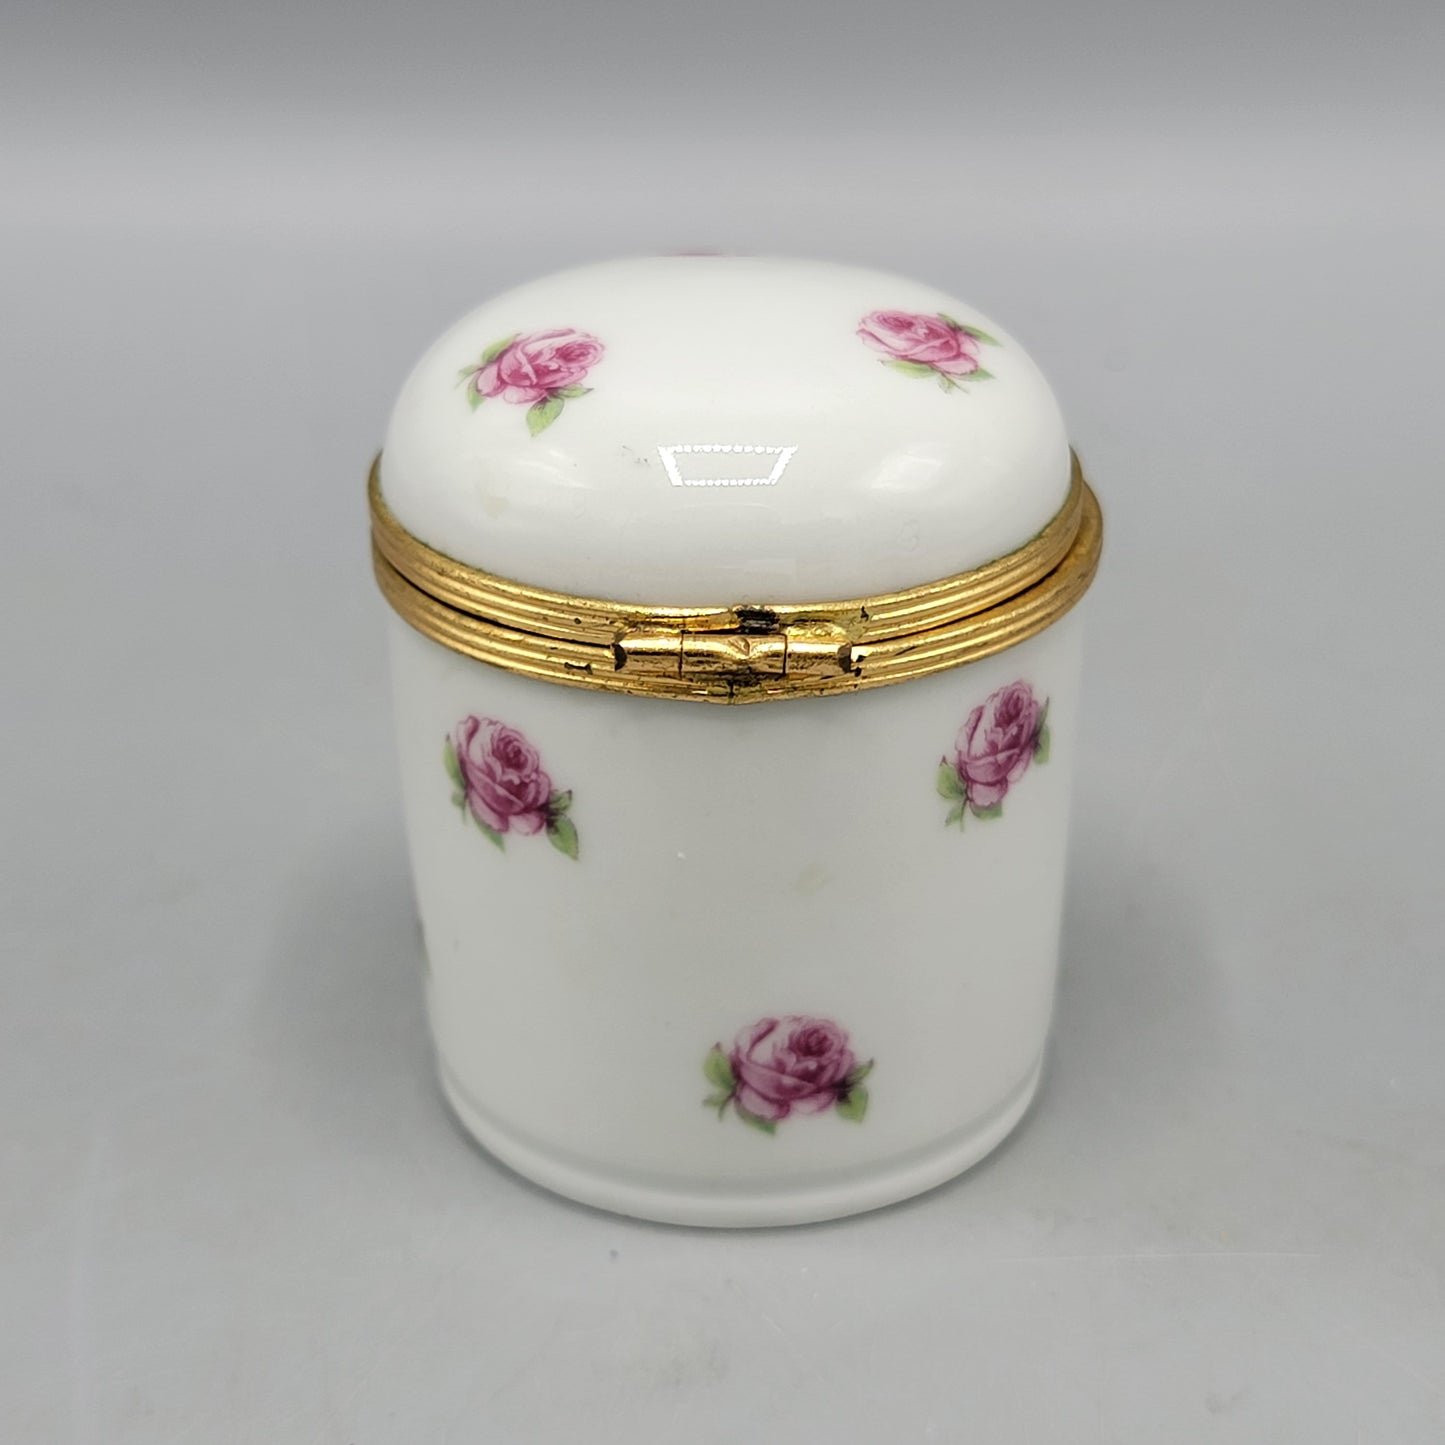 Chamart Limoges Porcelain Cylinder Box with Hand Painted Roses